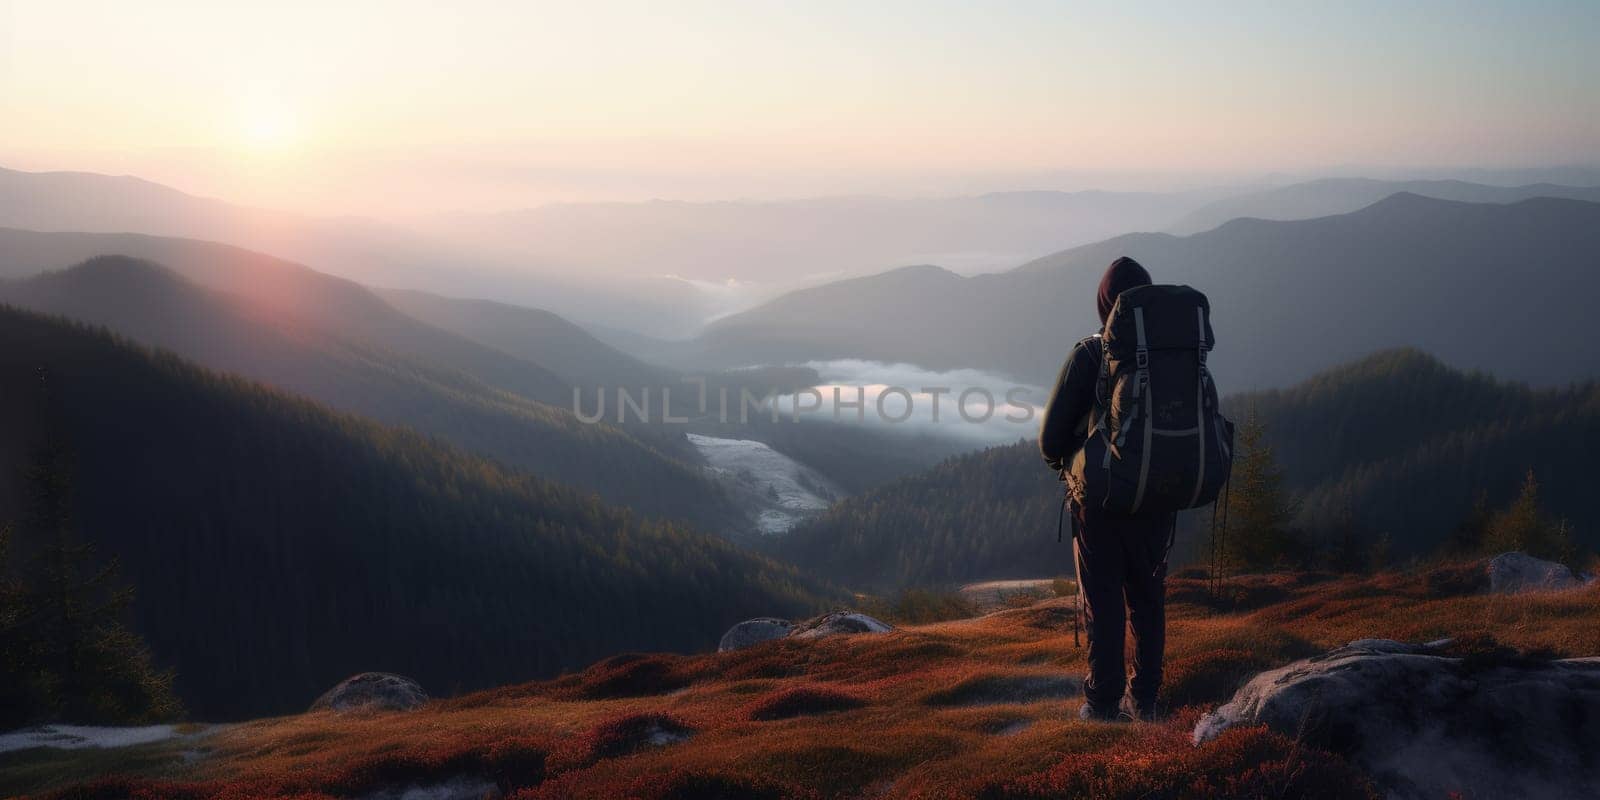 lonely hiker with backpack in mountains by tan4ikk1